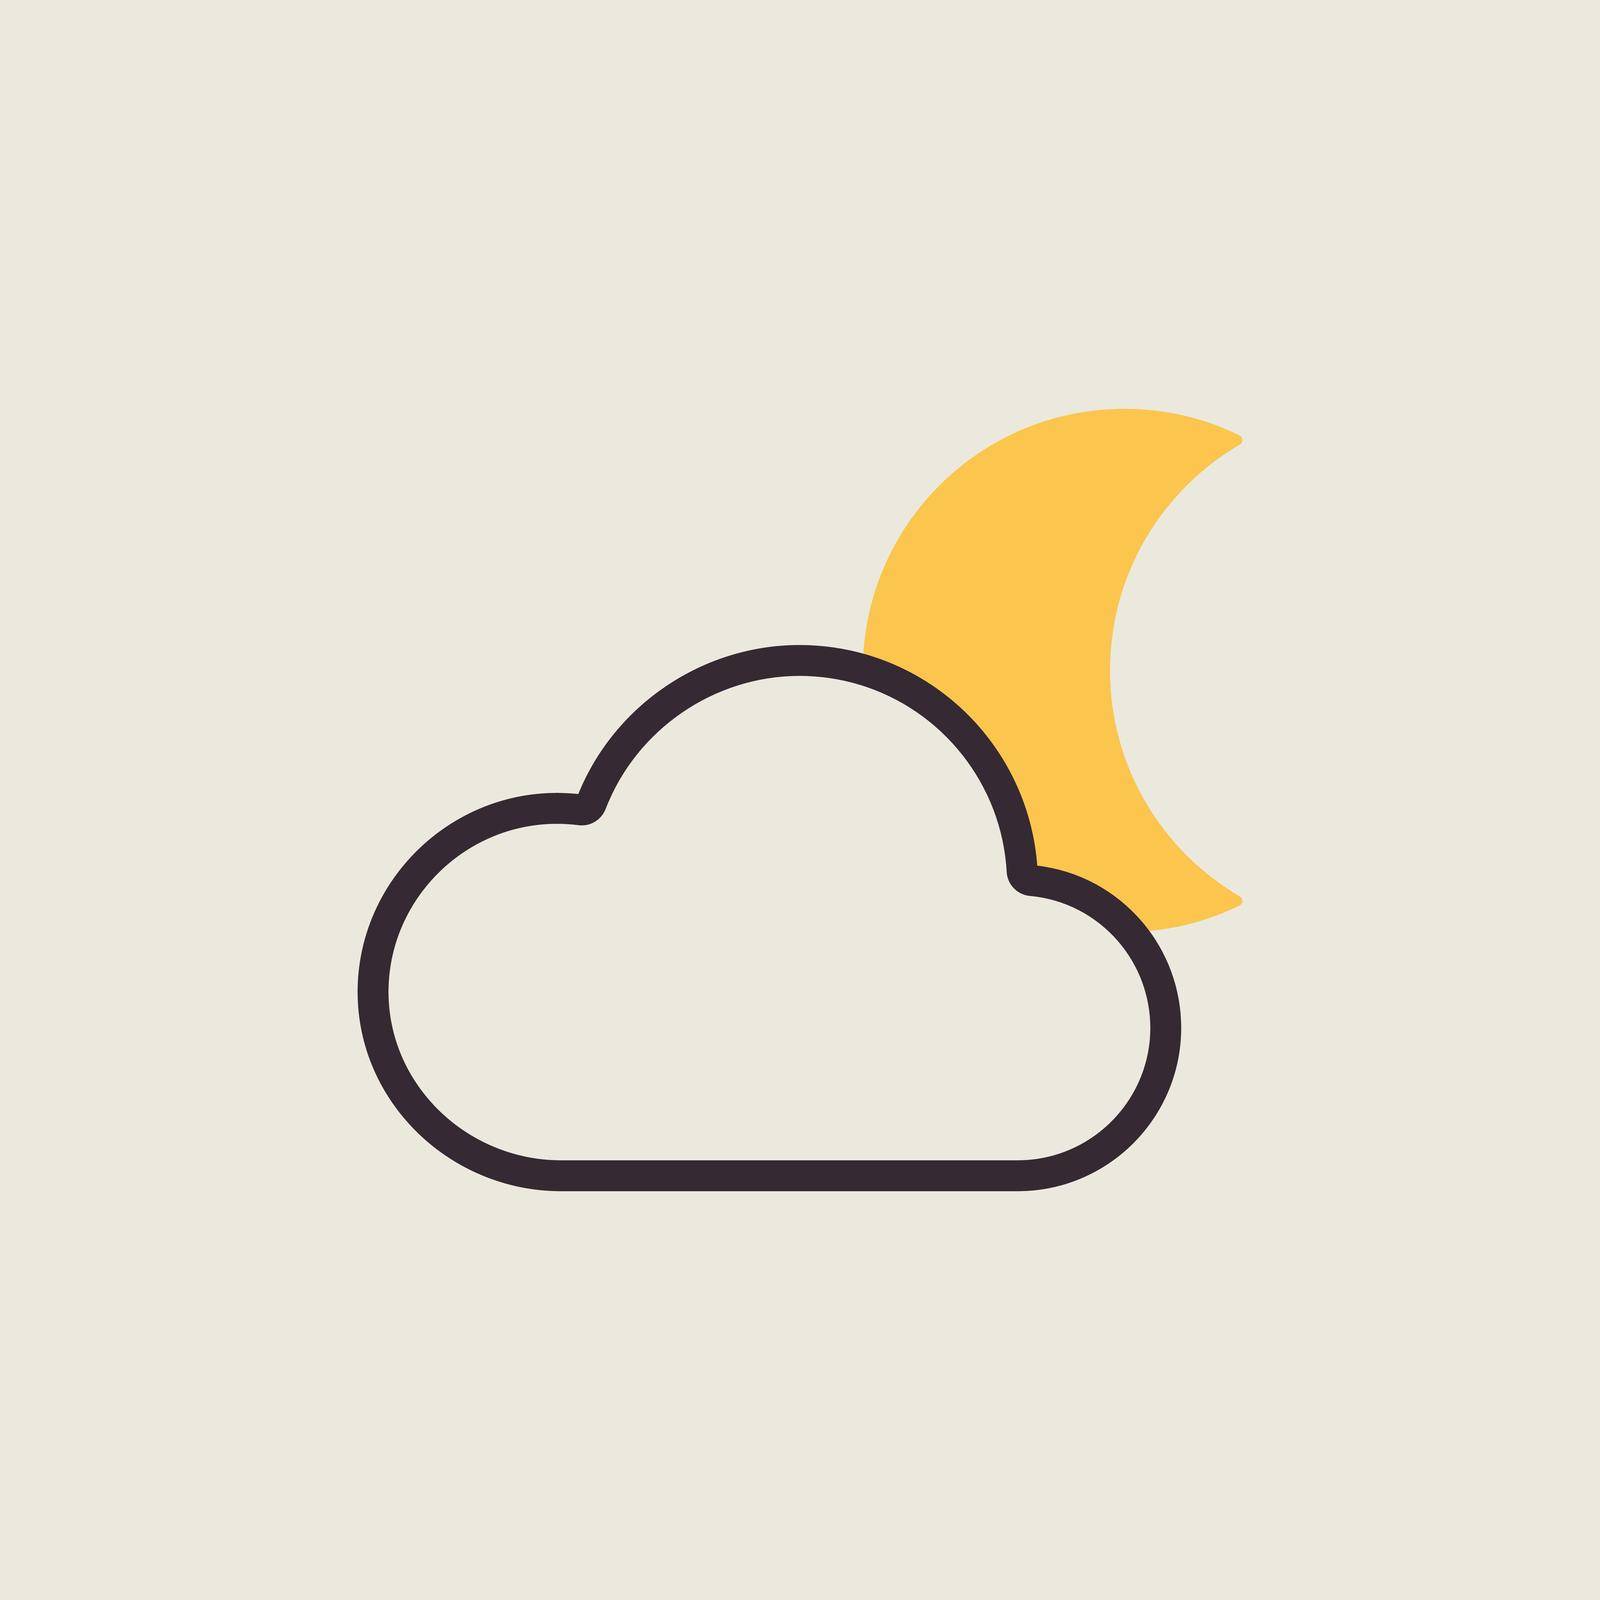 Moon and clouds vector icon. Meteorology sign. Graph symbol for travel, tourism and weather web site and apps design, logo, app, UI